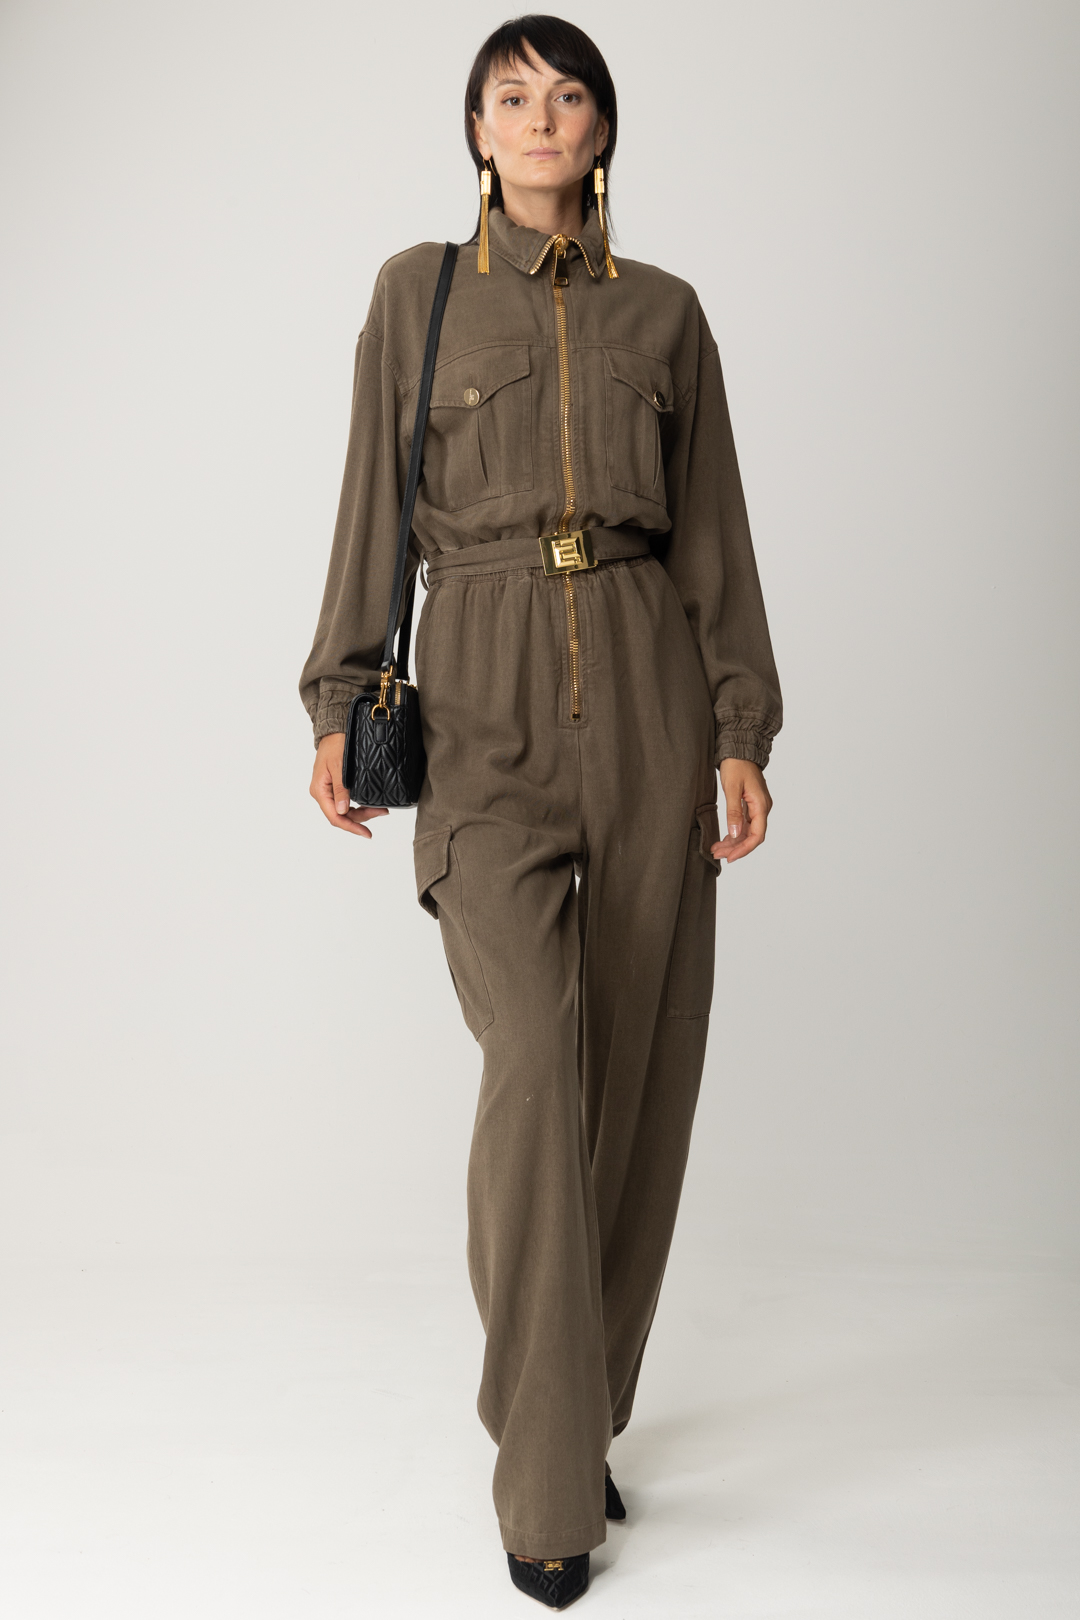 Preview: Elisabetta Franchi Utility suit with belt ARMY